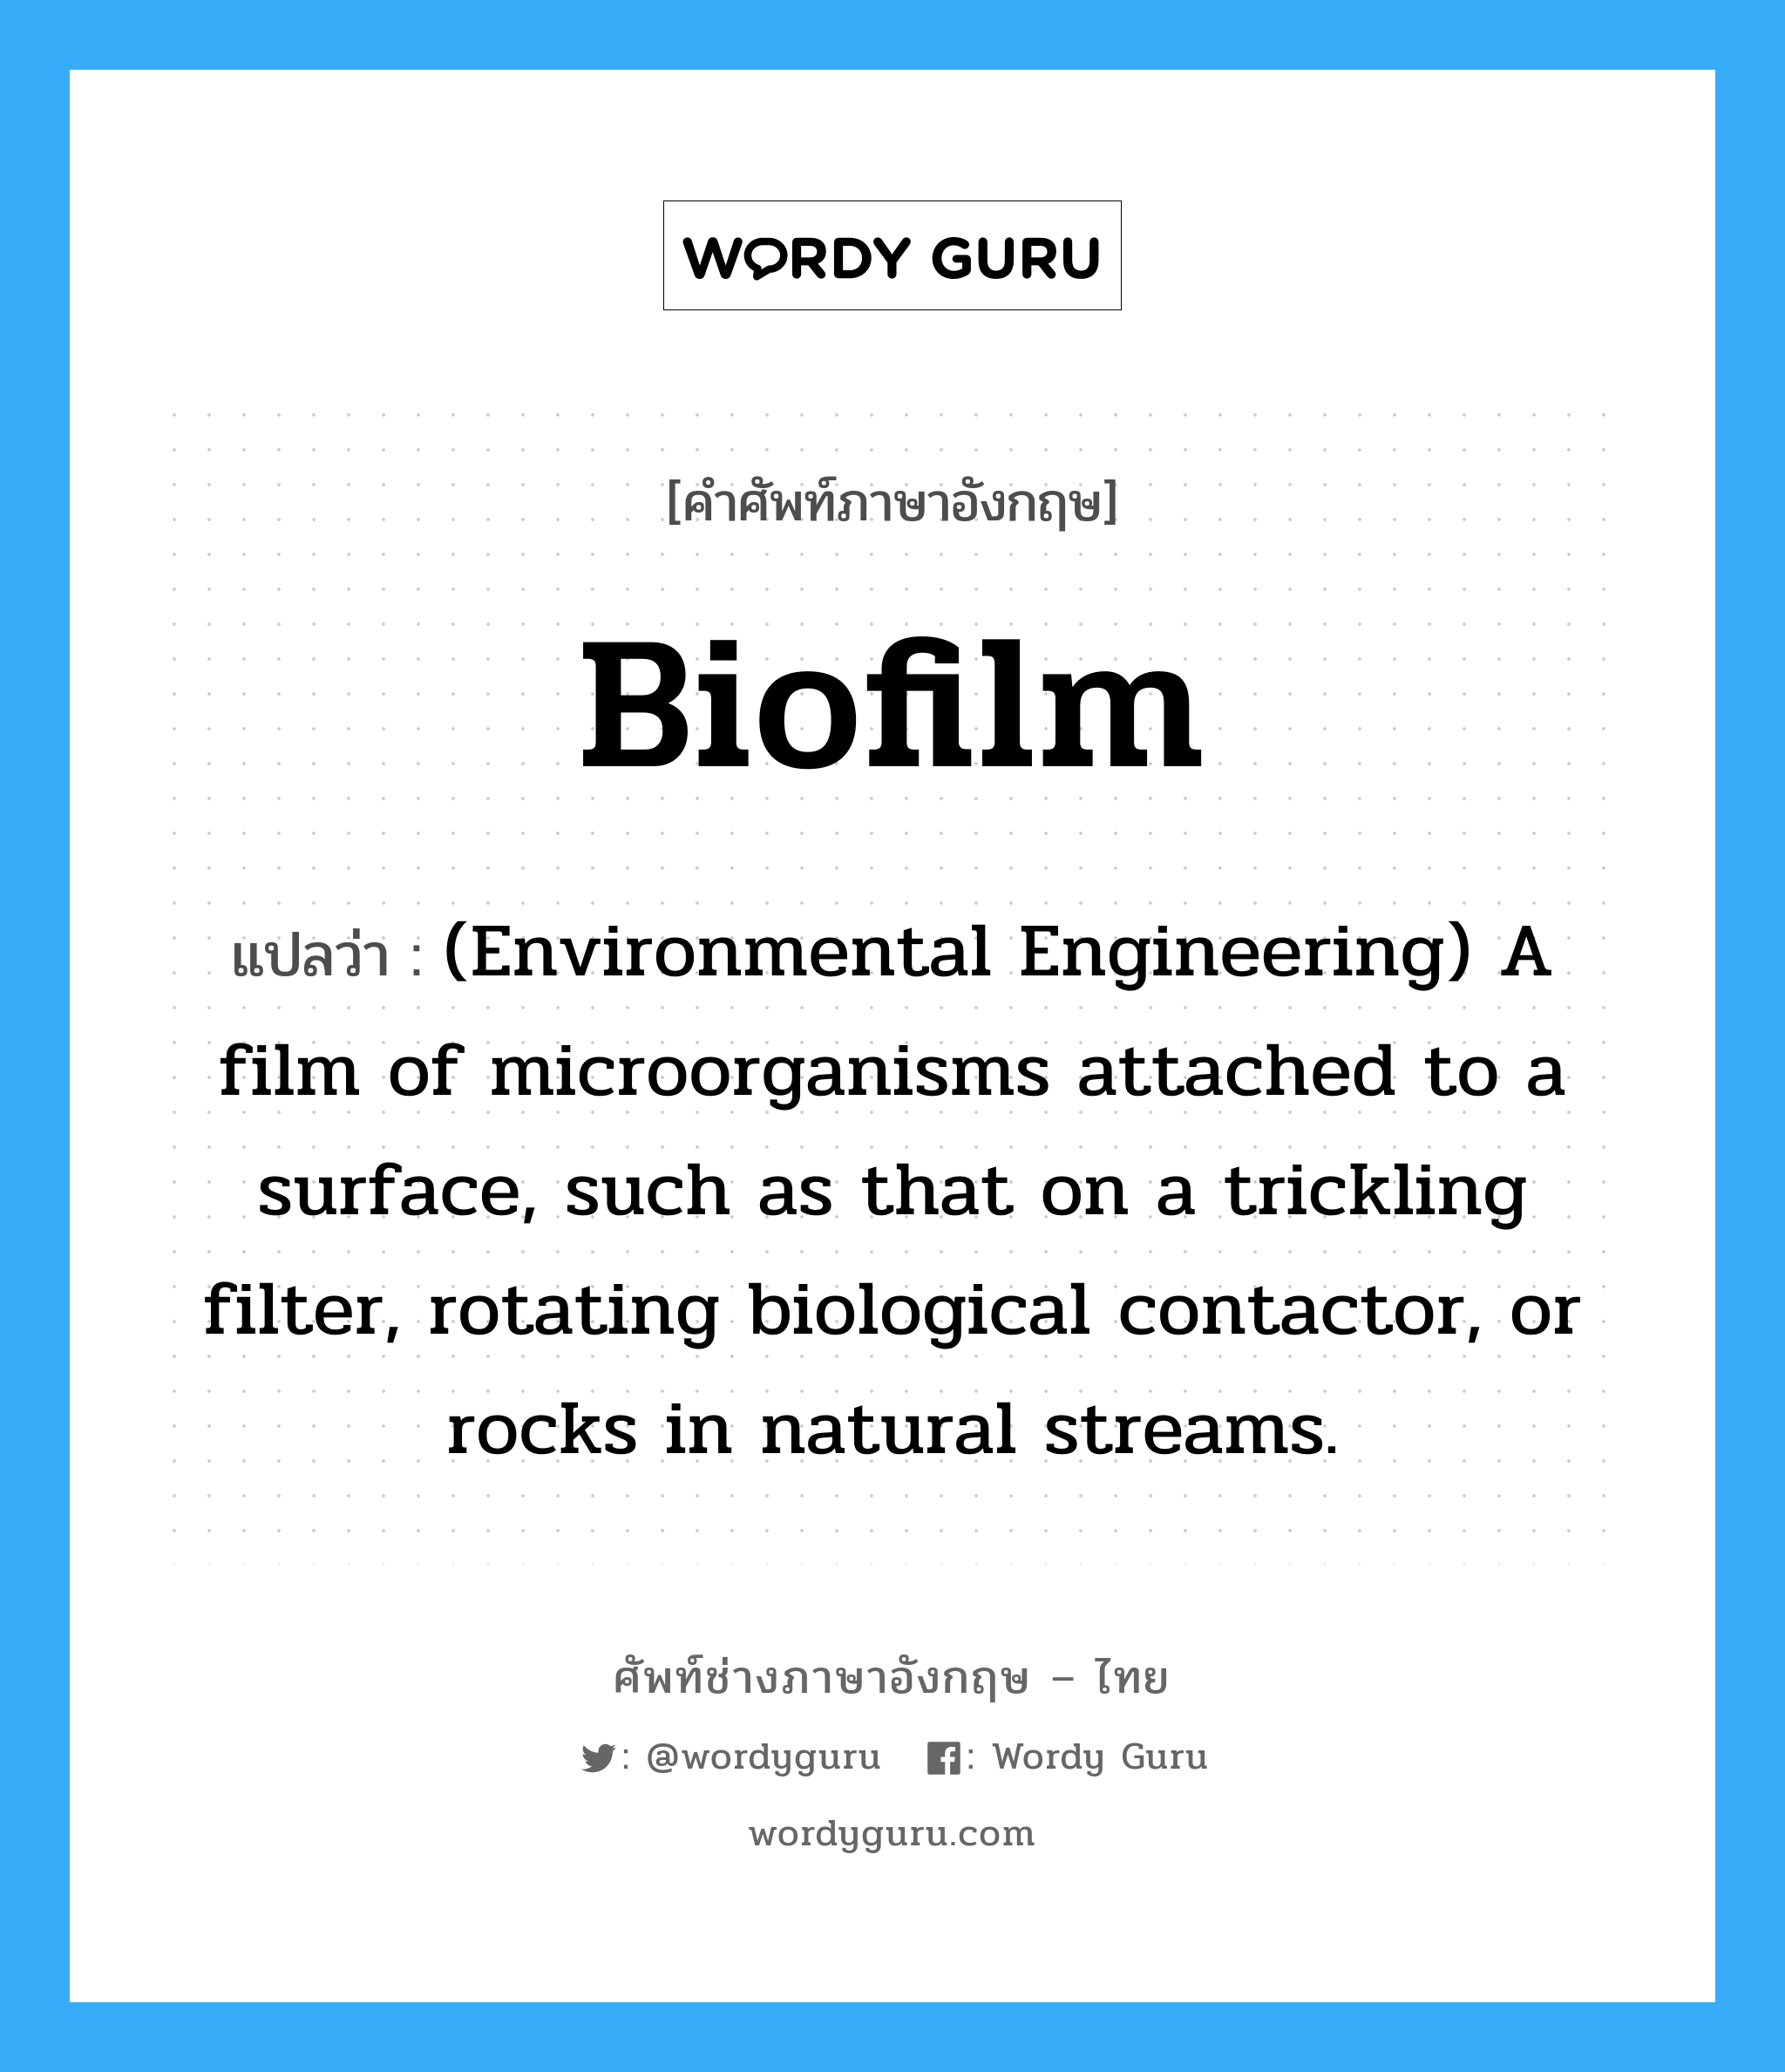 Biofilm แปลว่า?, คำศัพท์ช่างภาษาอังกฤษ - ไทย Biofilm คำศัพท์ภาษาอังกฤษ Biofilm แปลว่า (Environmental Engineering) A film of microorganisms attached to a surface, such as that on a trickling filter, rotating biological contactor, or rocks in natural streams.